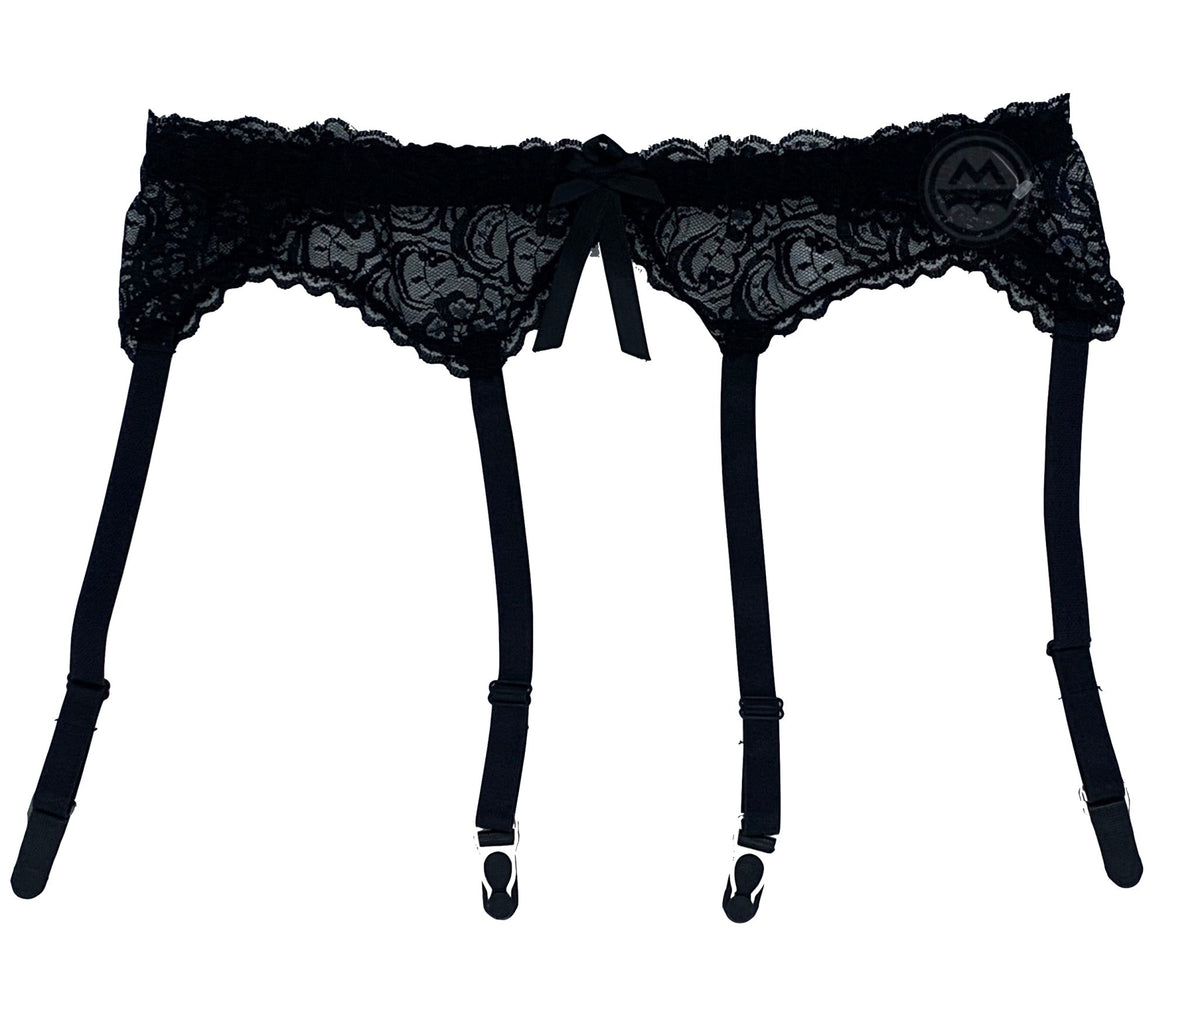 Scalloped Lace Garter Belt with Bow - Black - Model Express VancouverHosiery